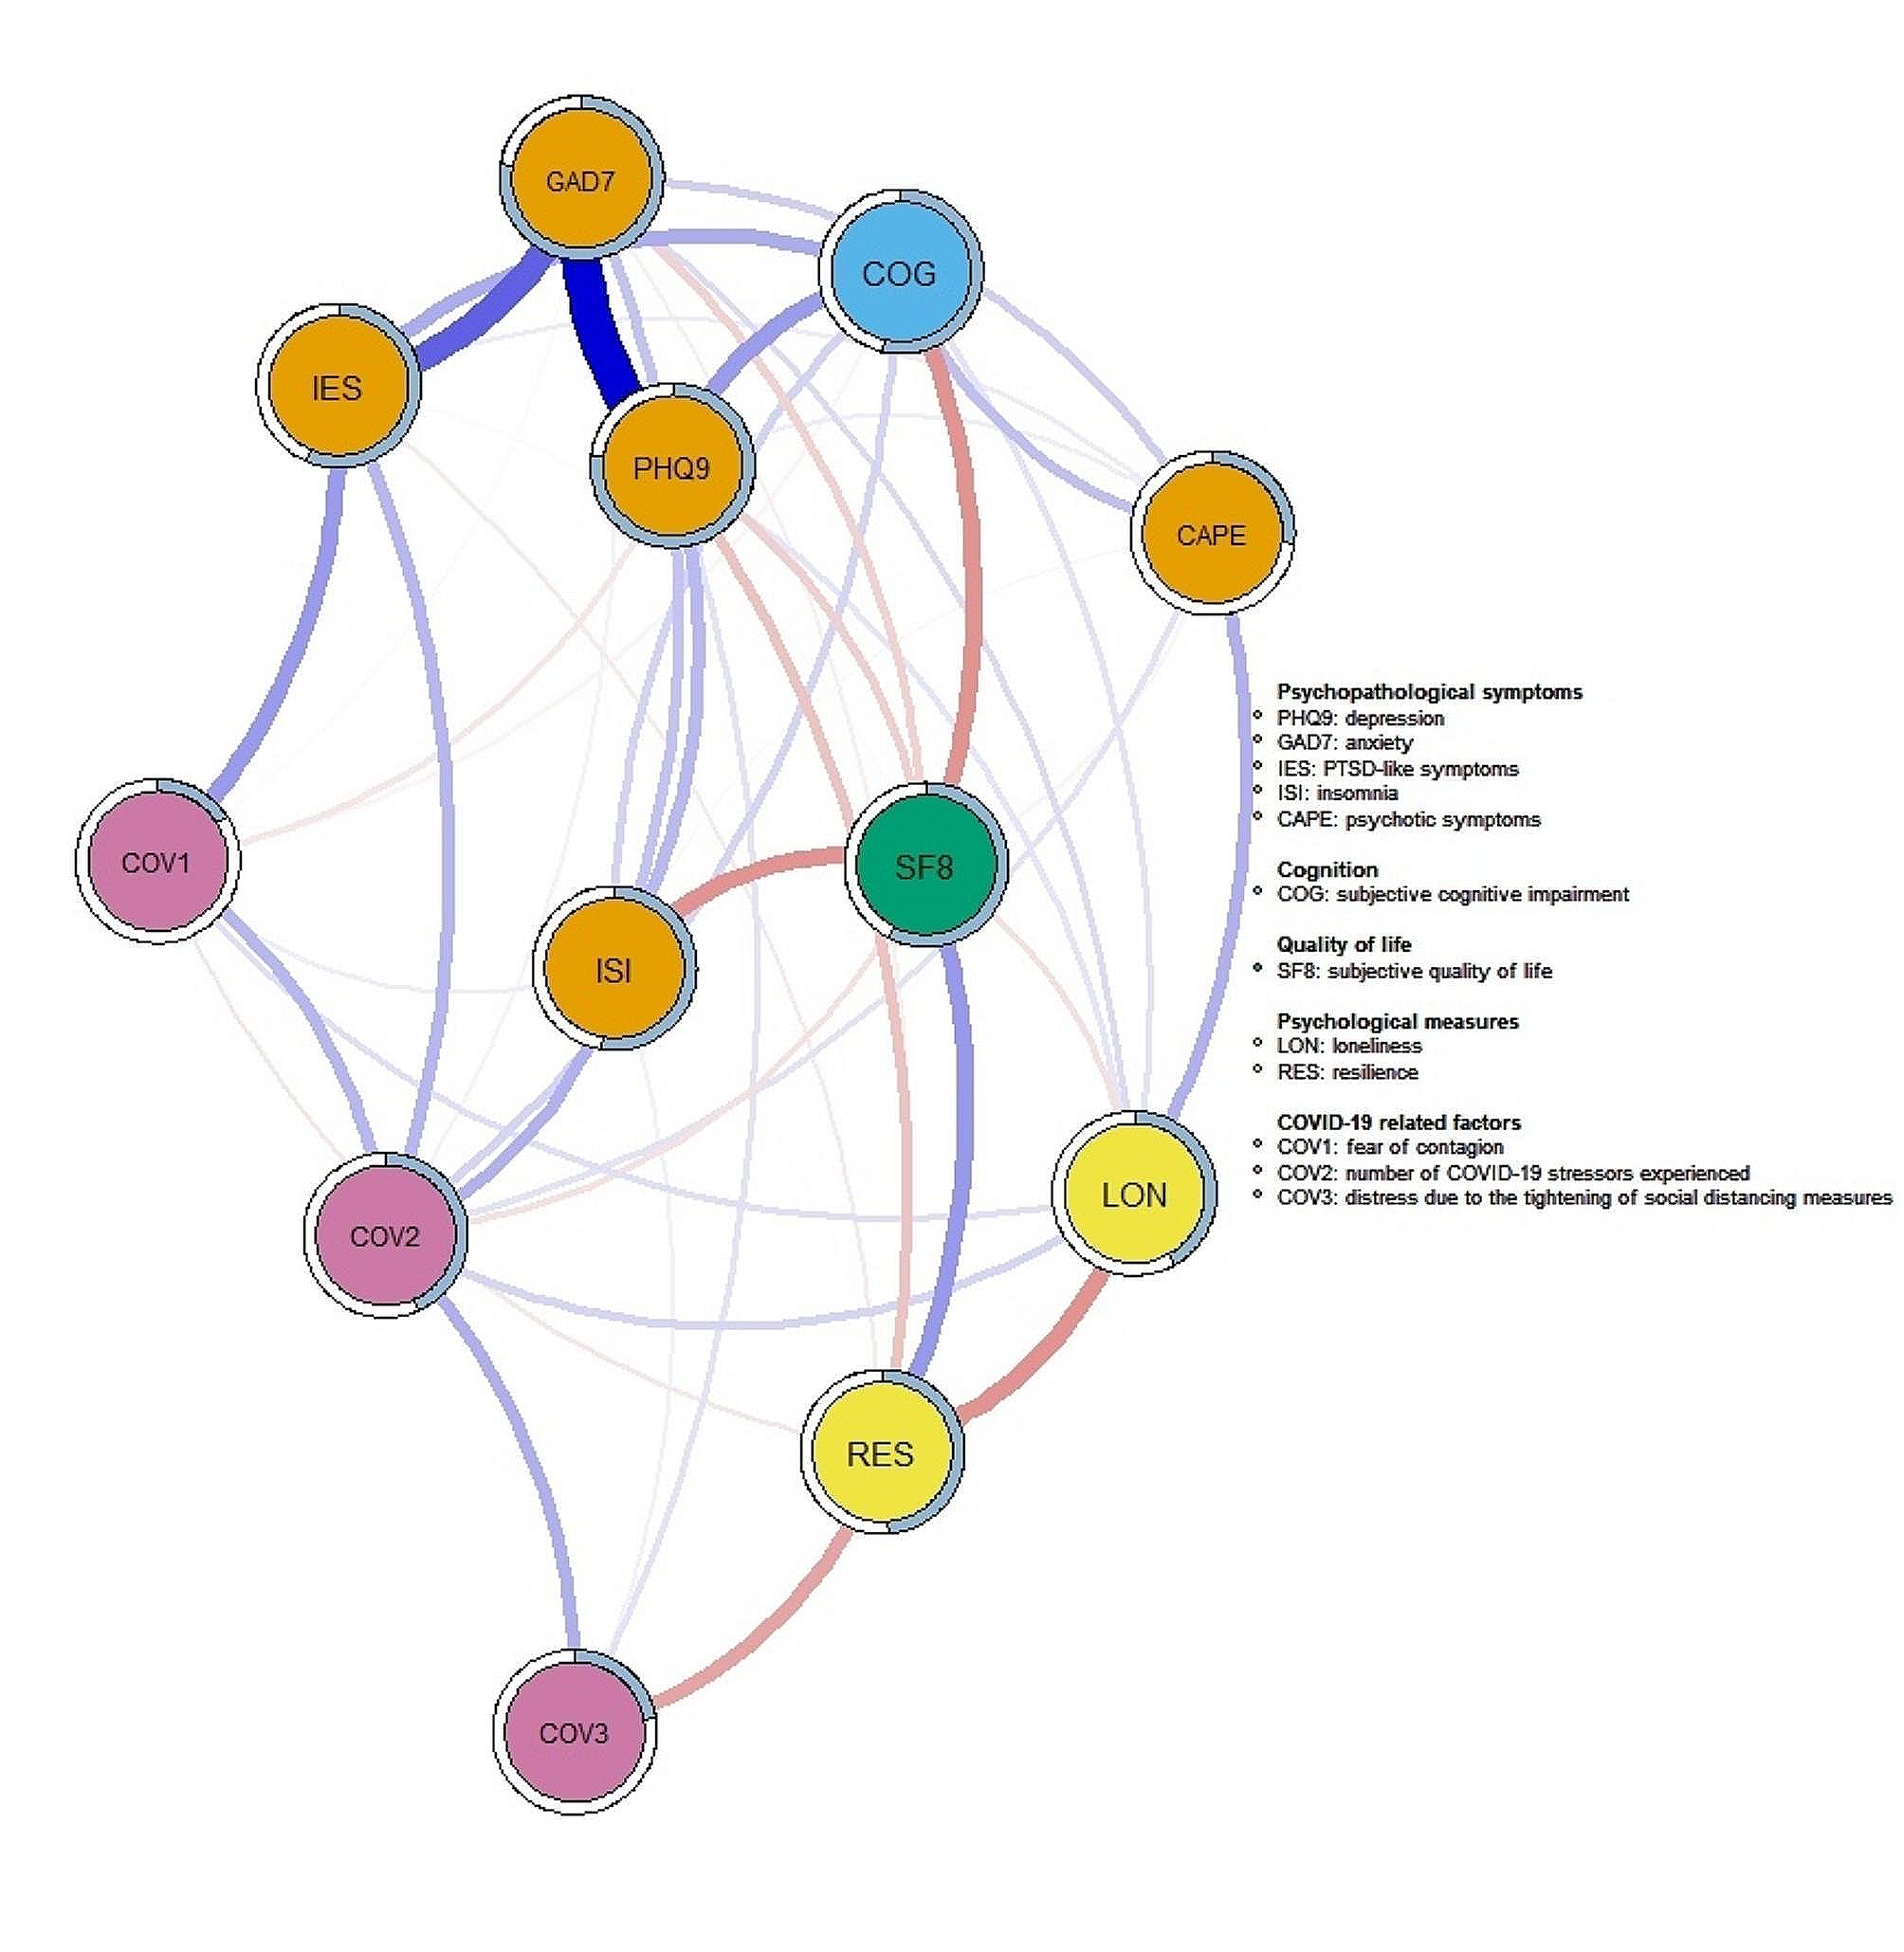 Network analysis on psychopathological symptoms, psychological measures, quality of life and COVID-19 related factors in Chinese psychiatric patients in Hong Kong